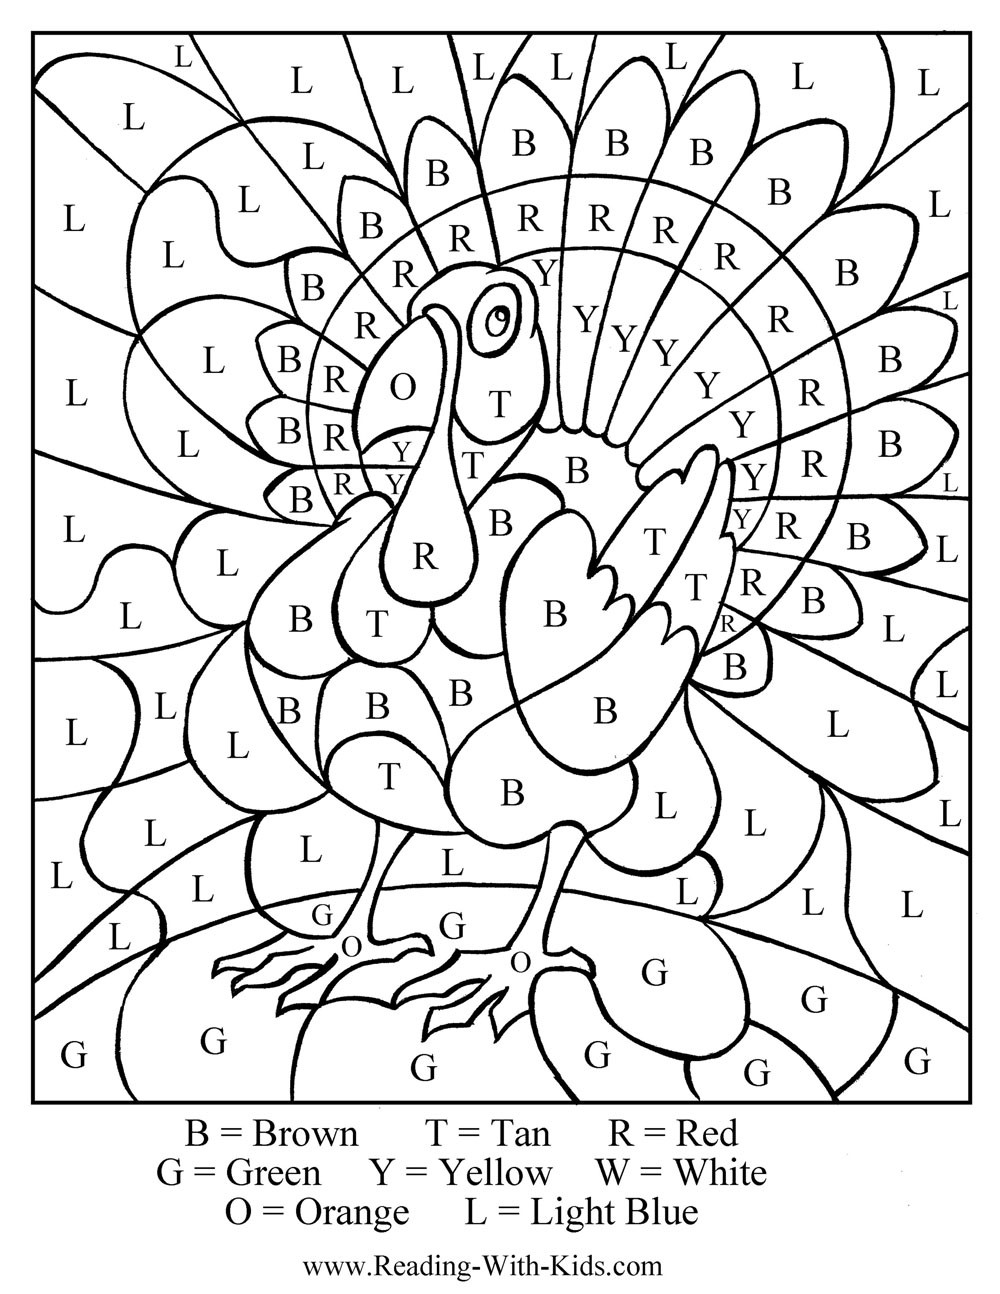 Thanksgiving Coloring Pages
 Thanksgiving coloring page